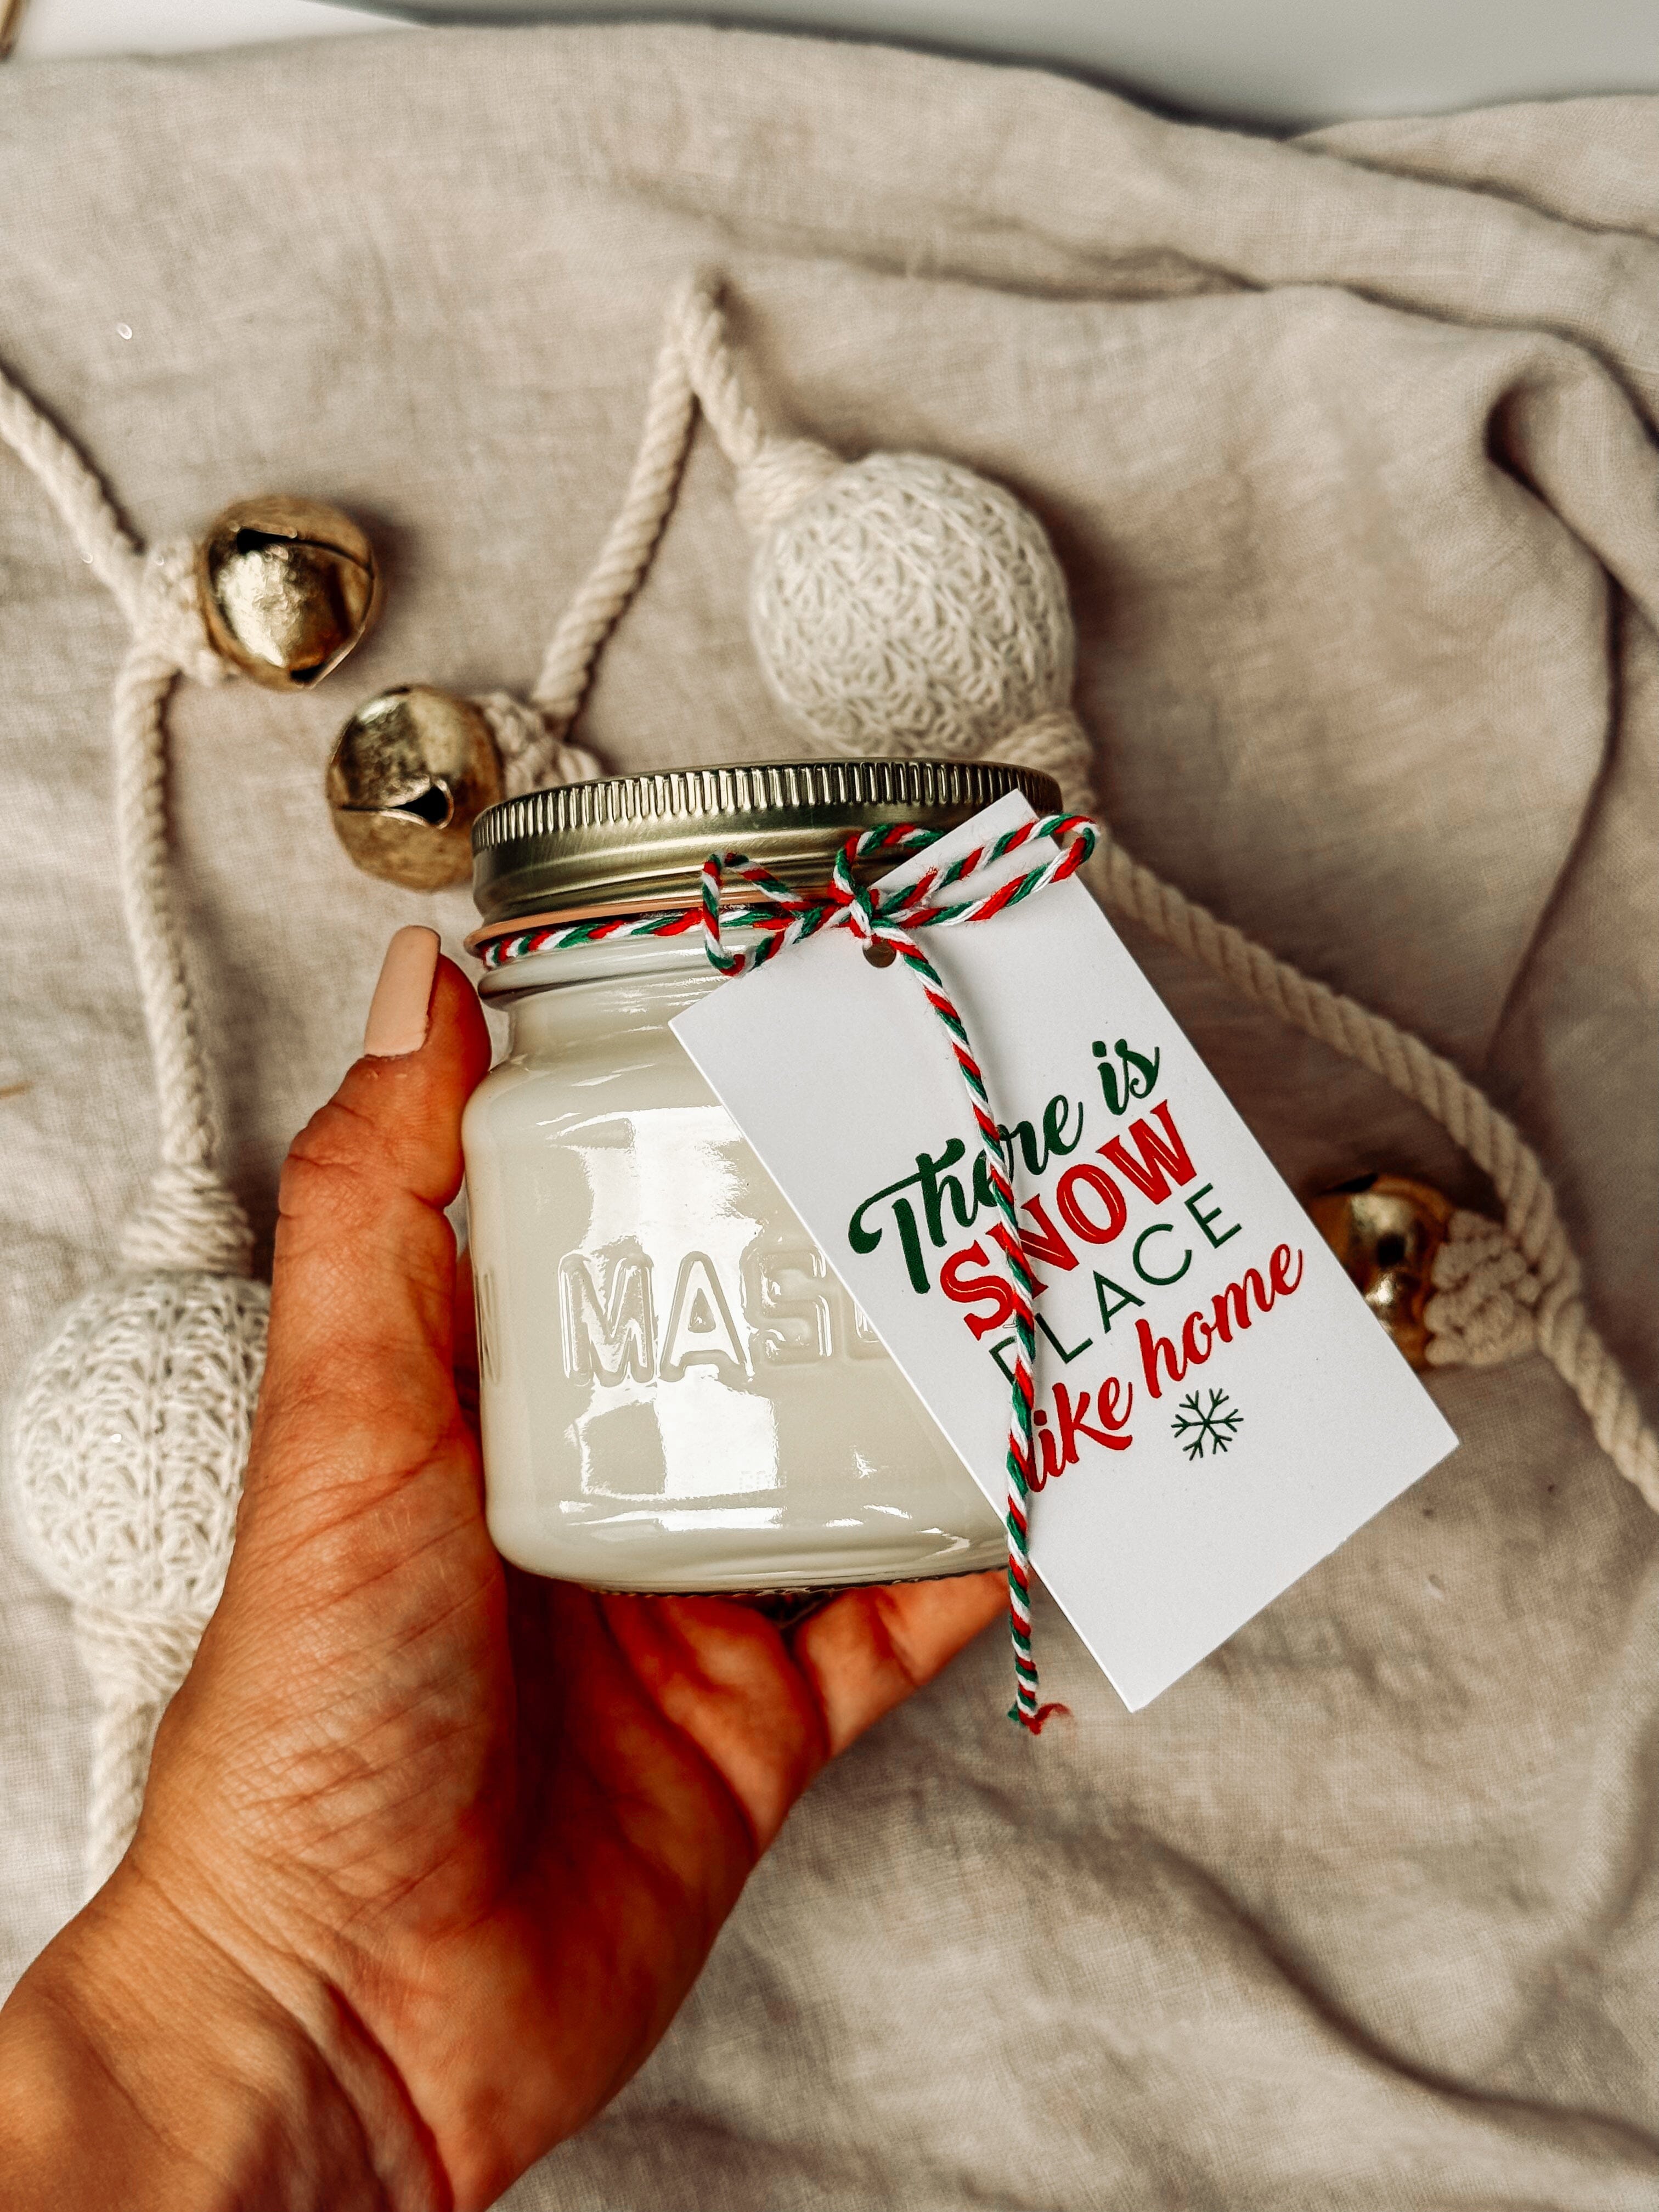 Funny 9oz Soy Wax Christmas Candle Holiday Gift Idea For Your